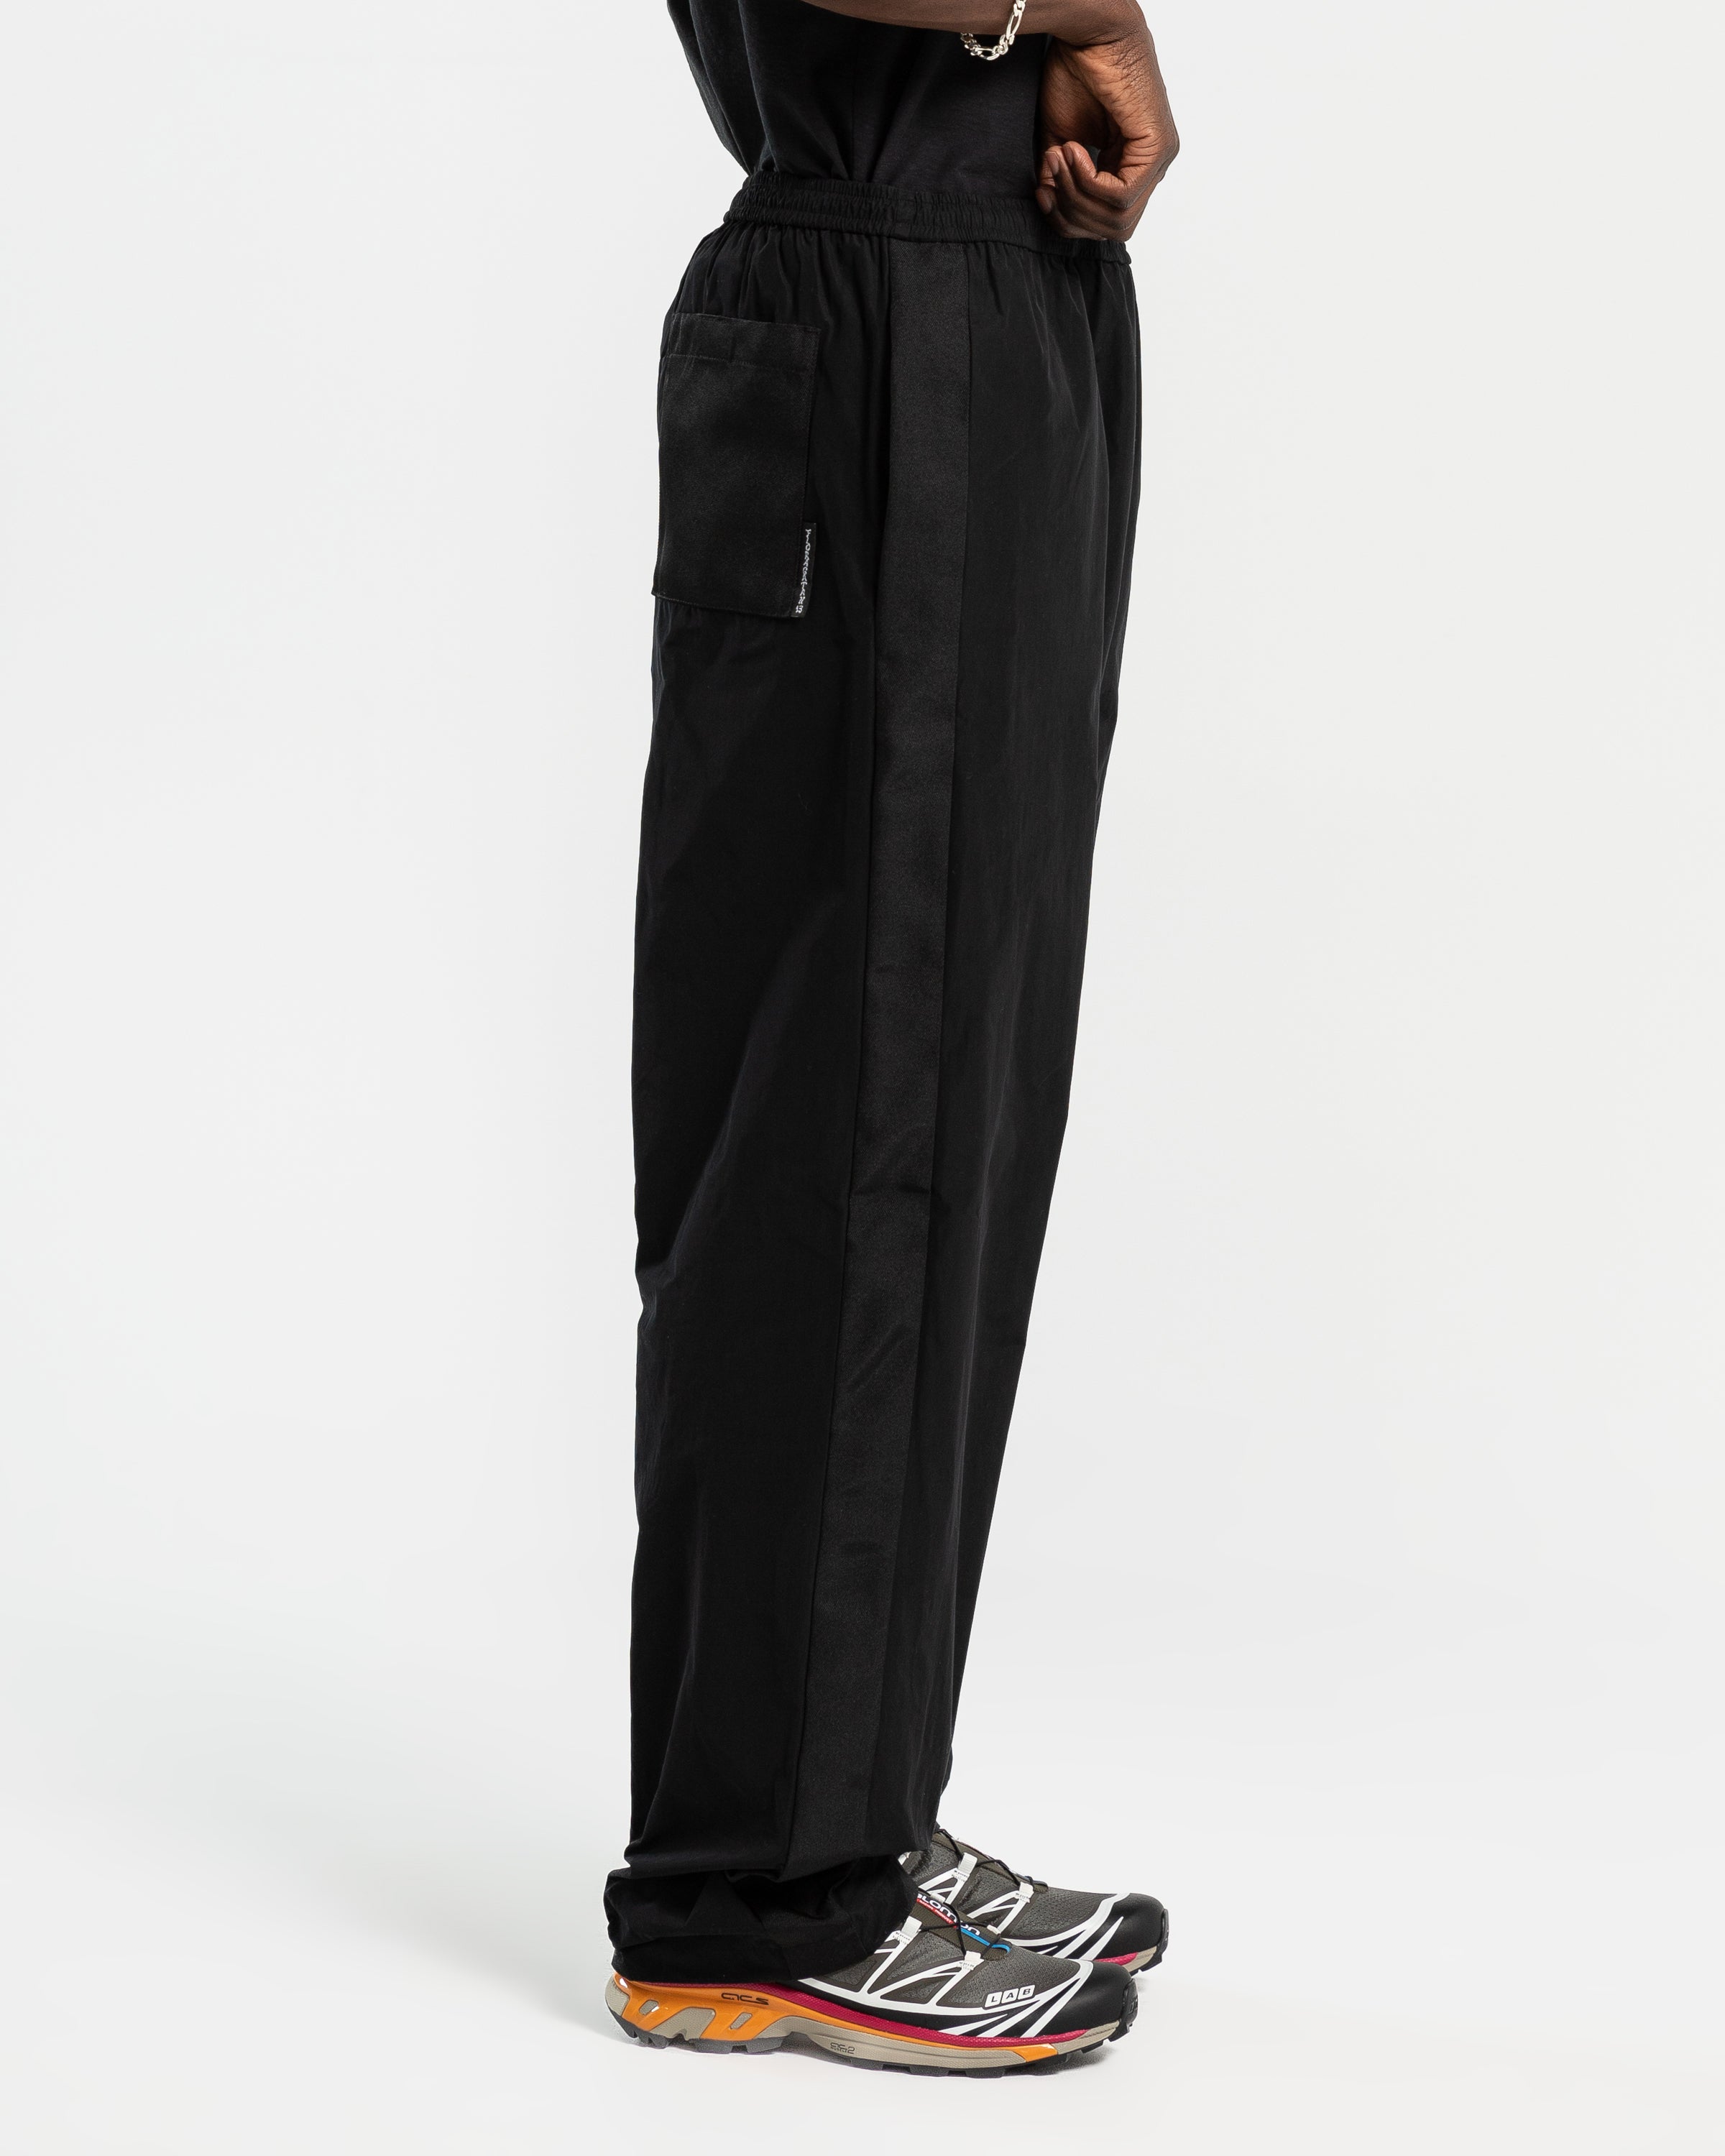 Relaxed Fit Trouser in Black